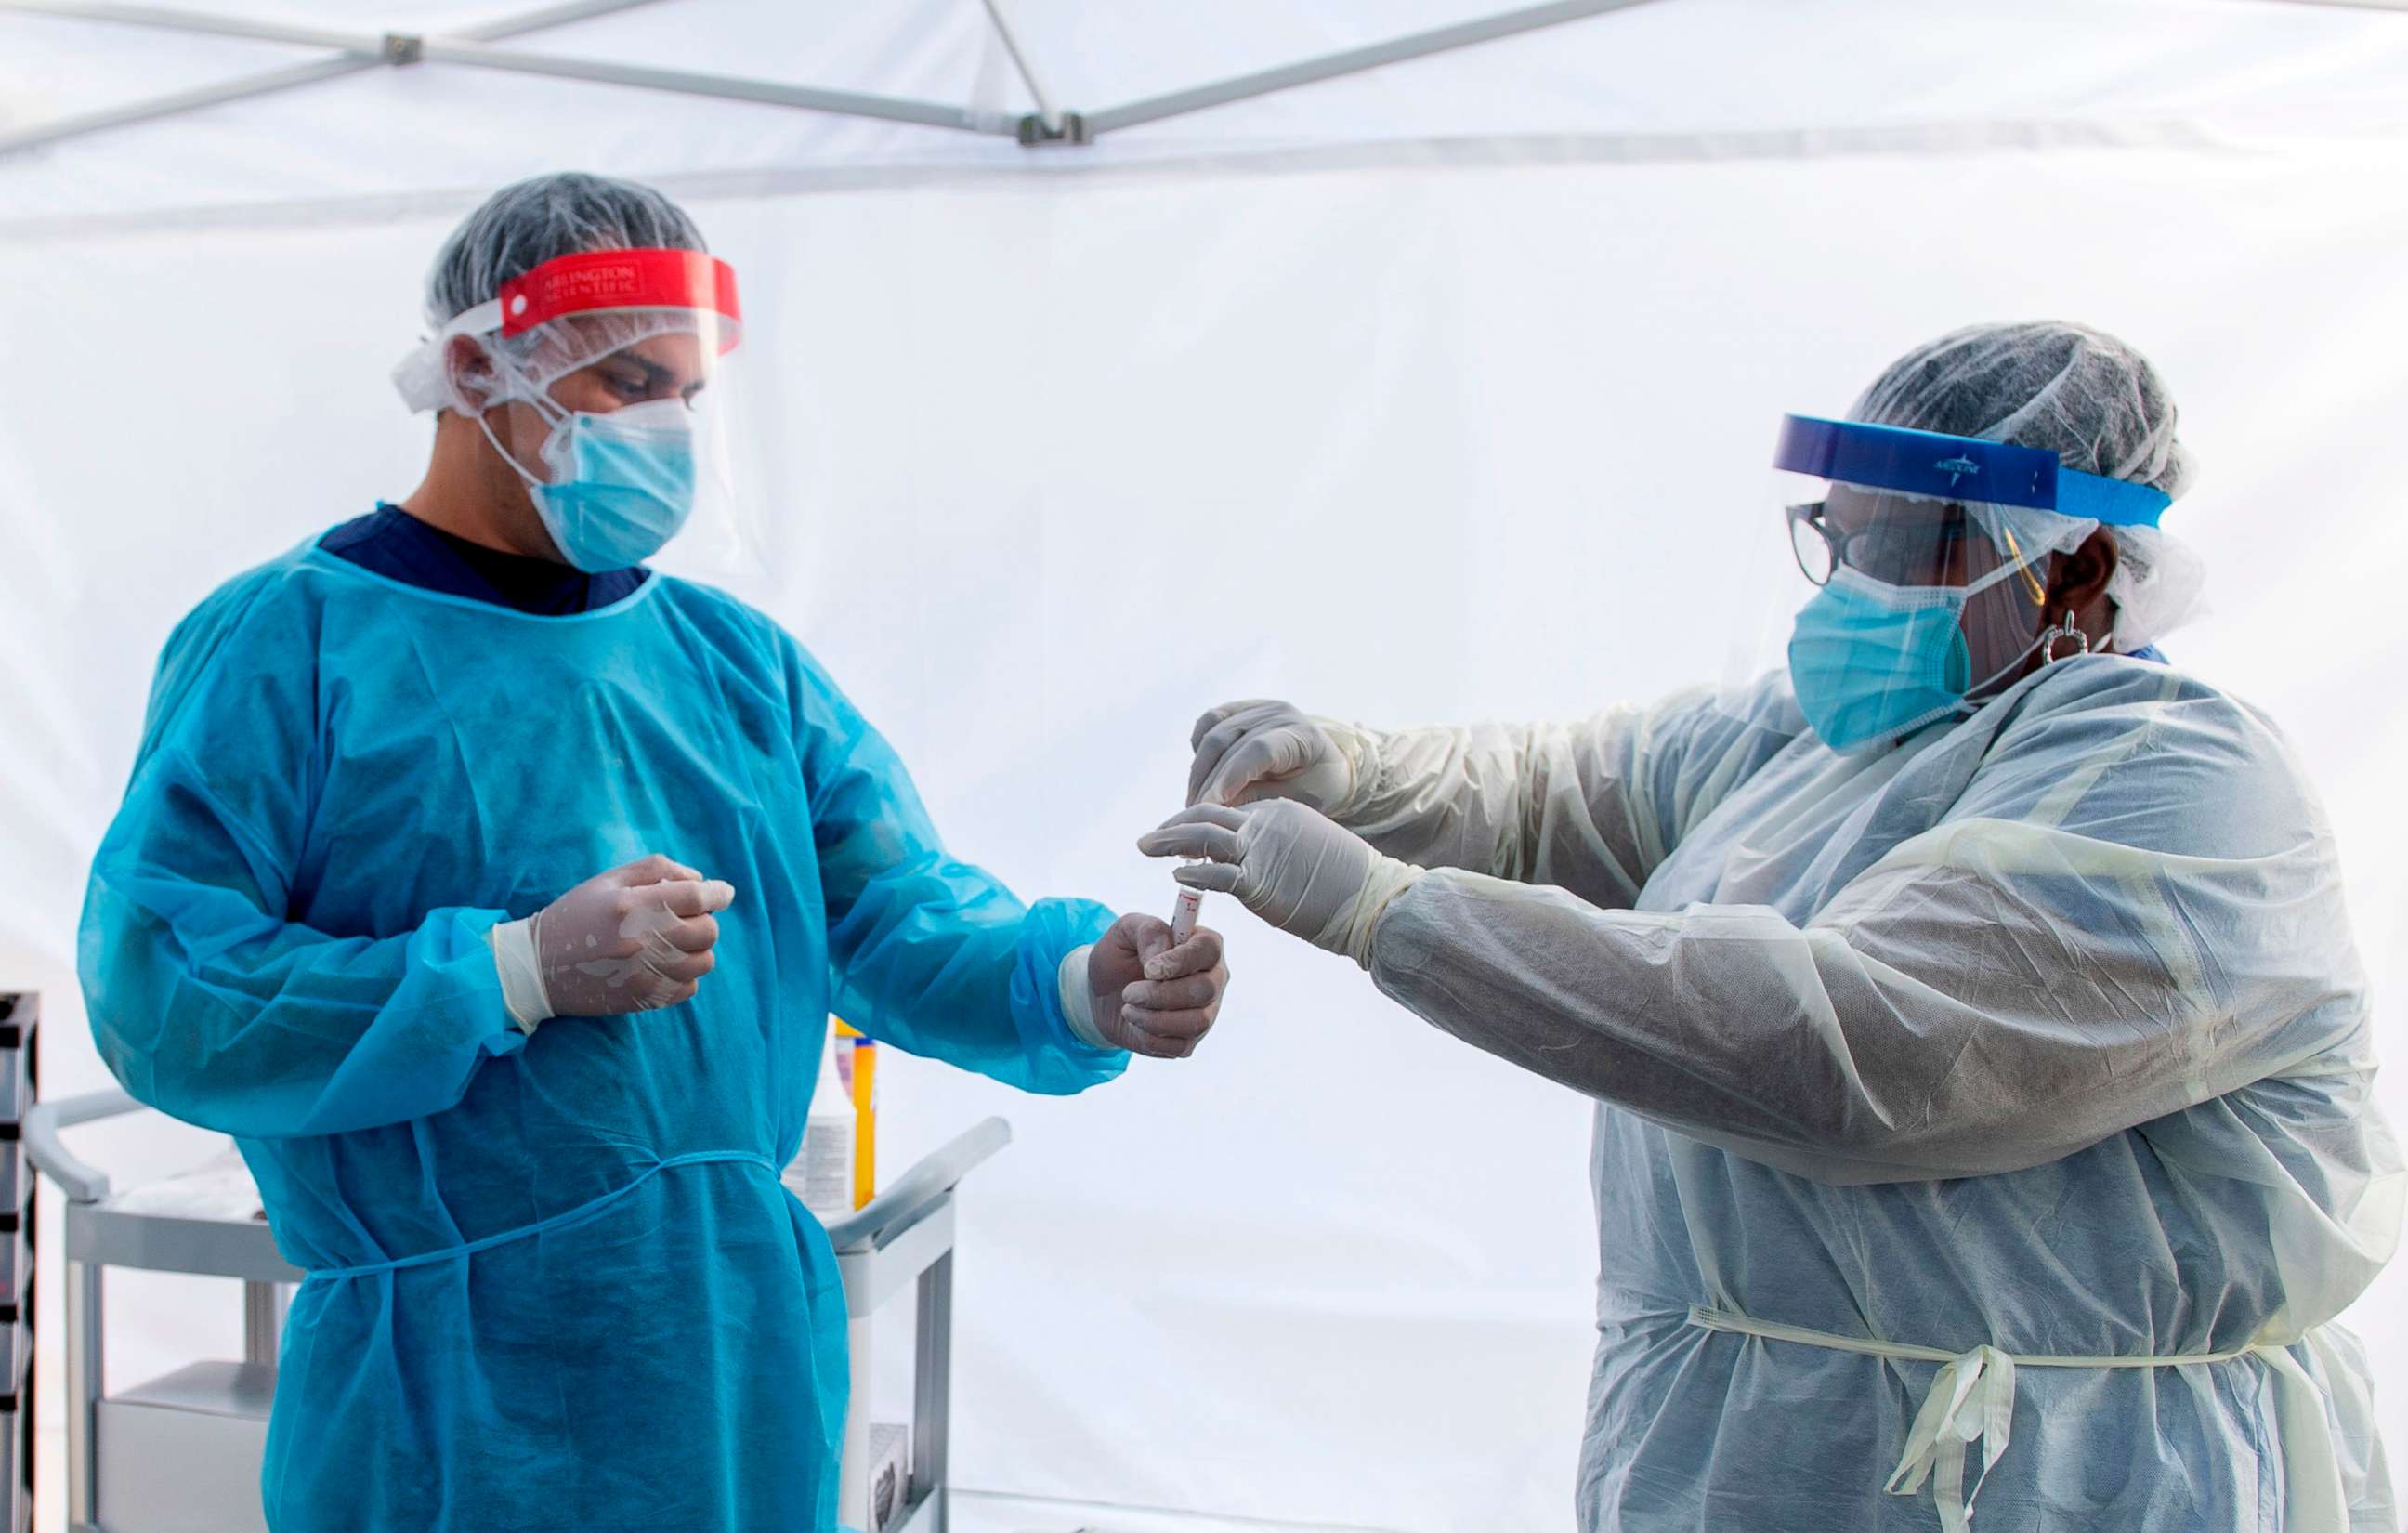 PHOTO: A health worker puts a nasal swab sample into a tube in a tent at a COVID-19 testing site at St. John's Well Child and Family Center, amid the COVID-19 pandemic, July 24, 2020, in Los Angeles.